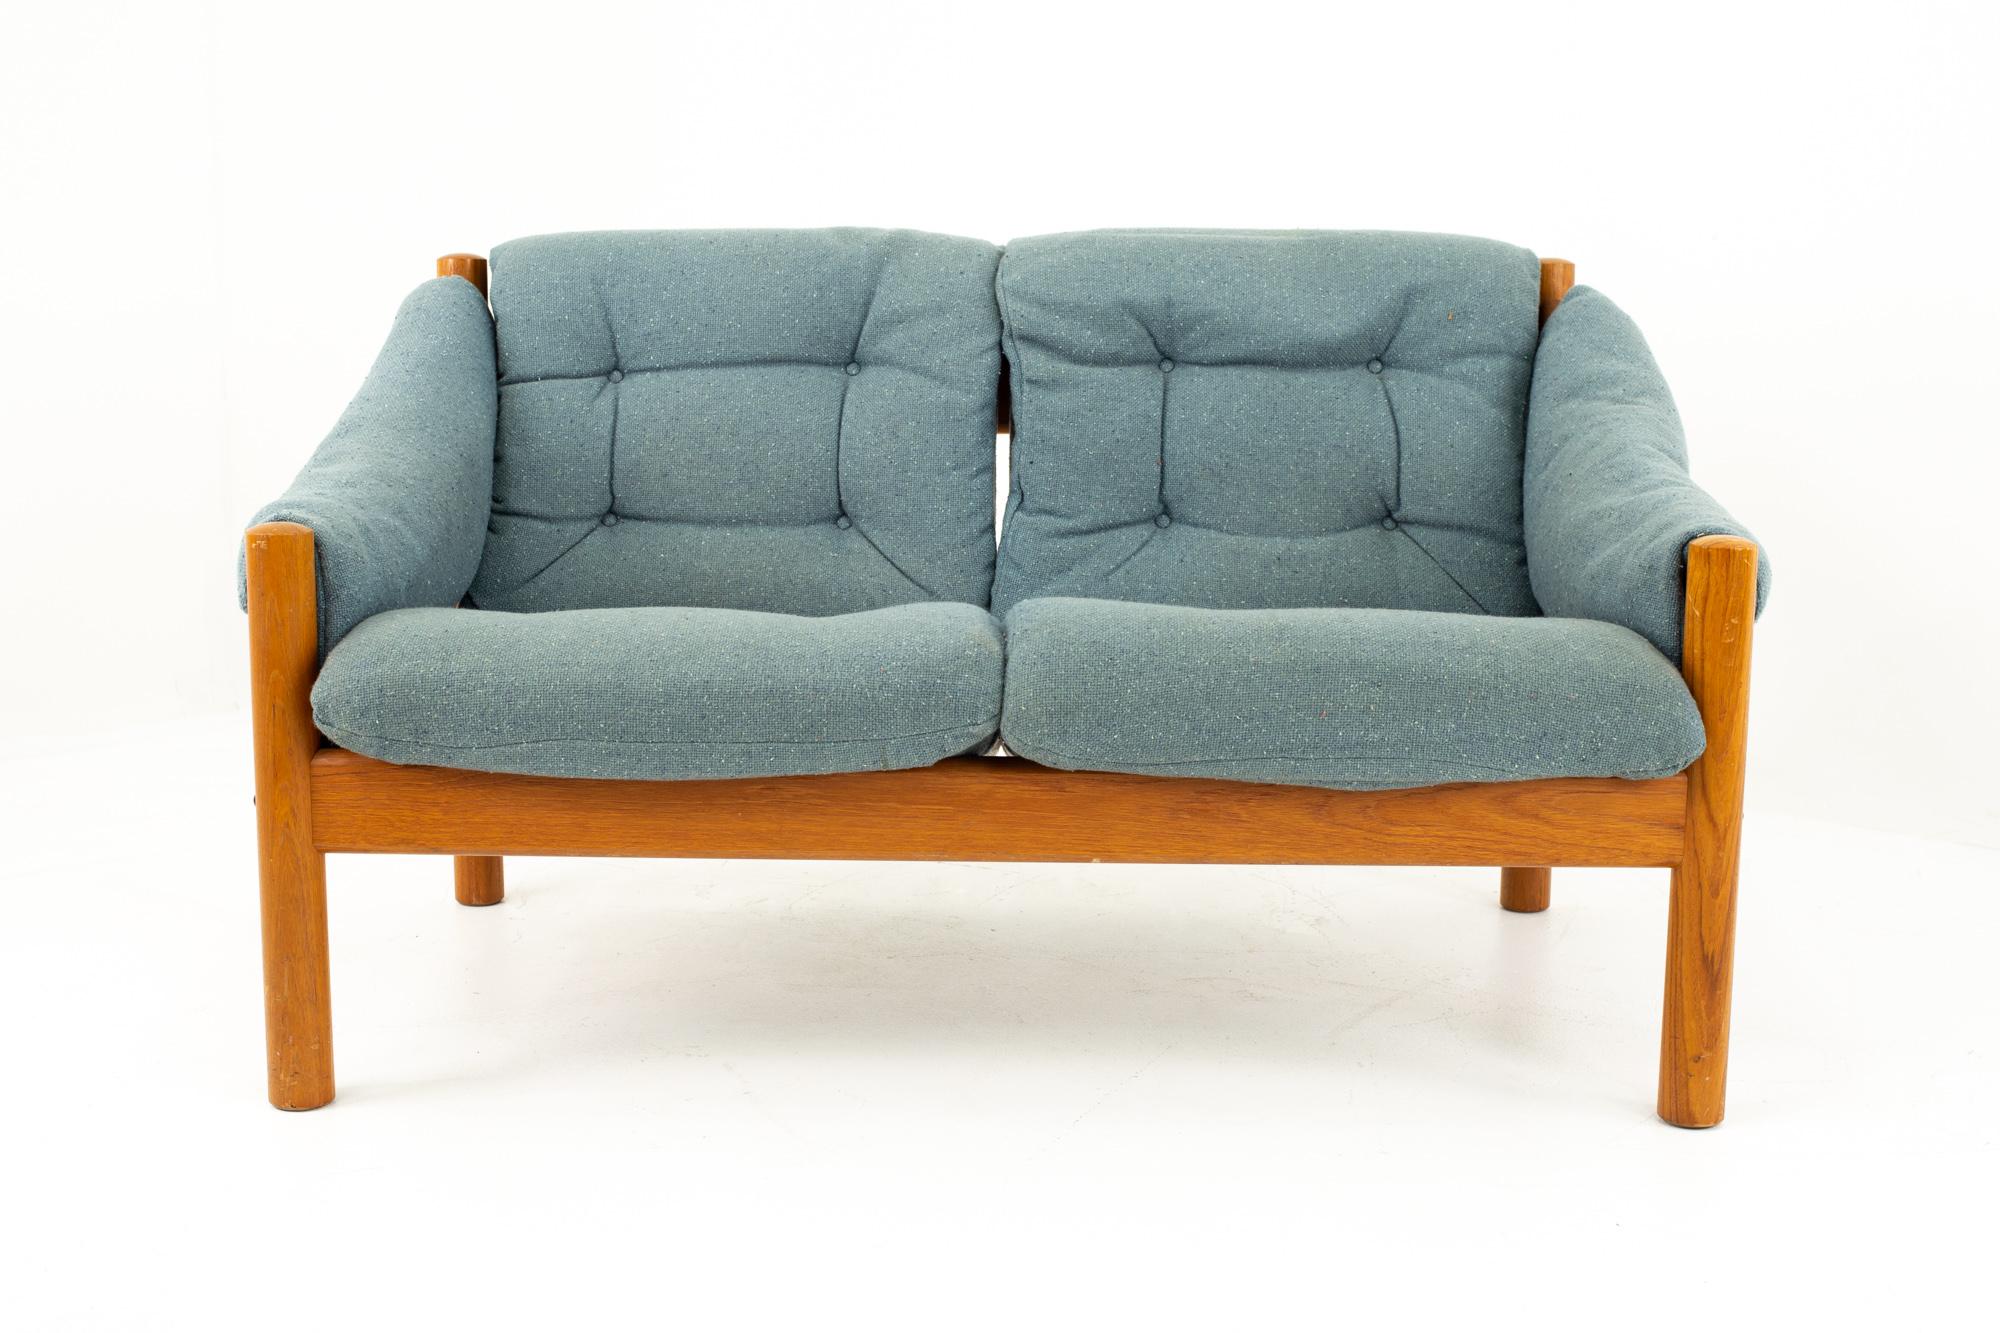 Mid Century Modern Teak and Blue Upholstered Sofa
Couch measures: 51 wide x 29 deep x 29 high

This piece is available in what we call Restored Vintage Condition. Upon purchase it is thoroughly cleaned and minor repairs are made - all of this is